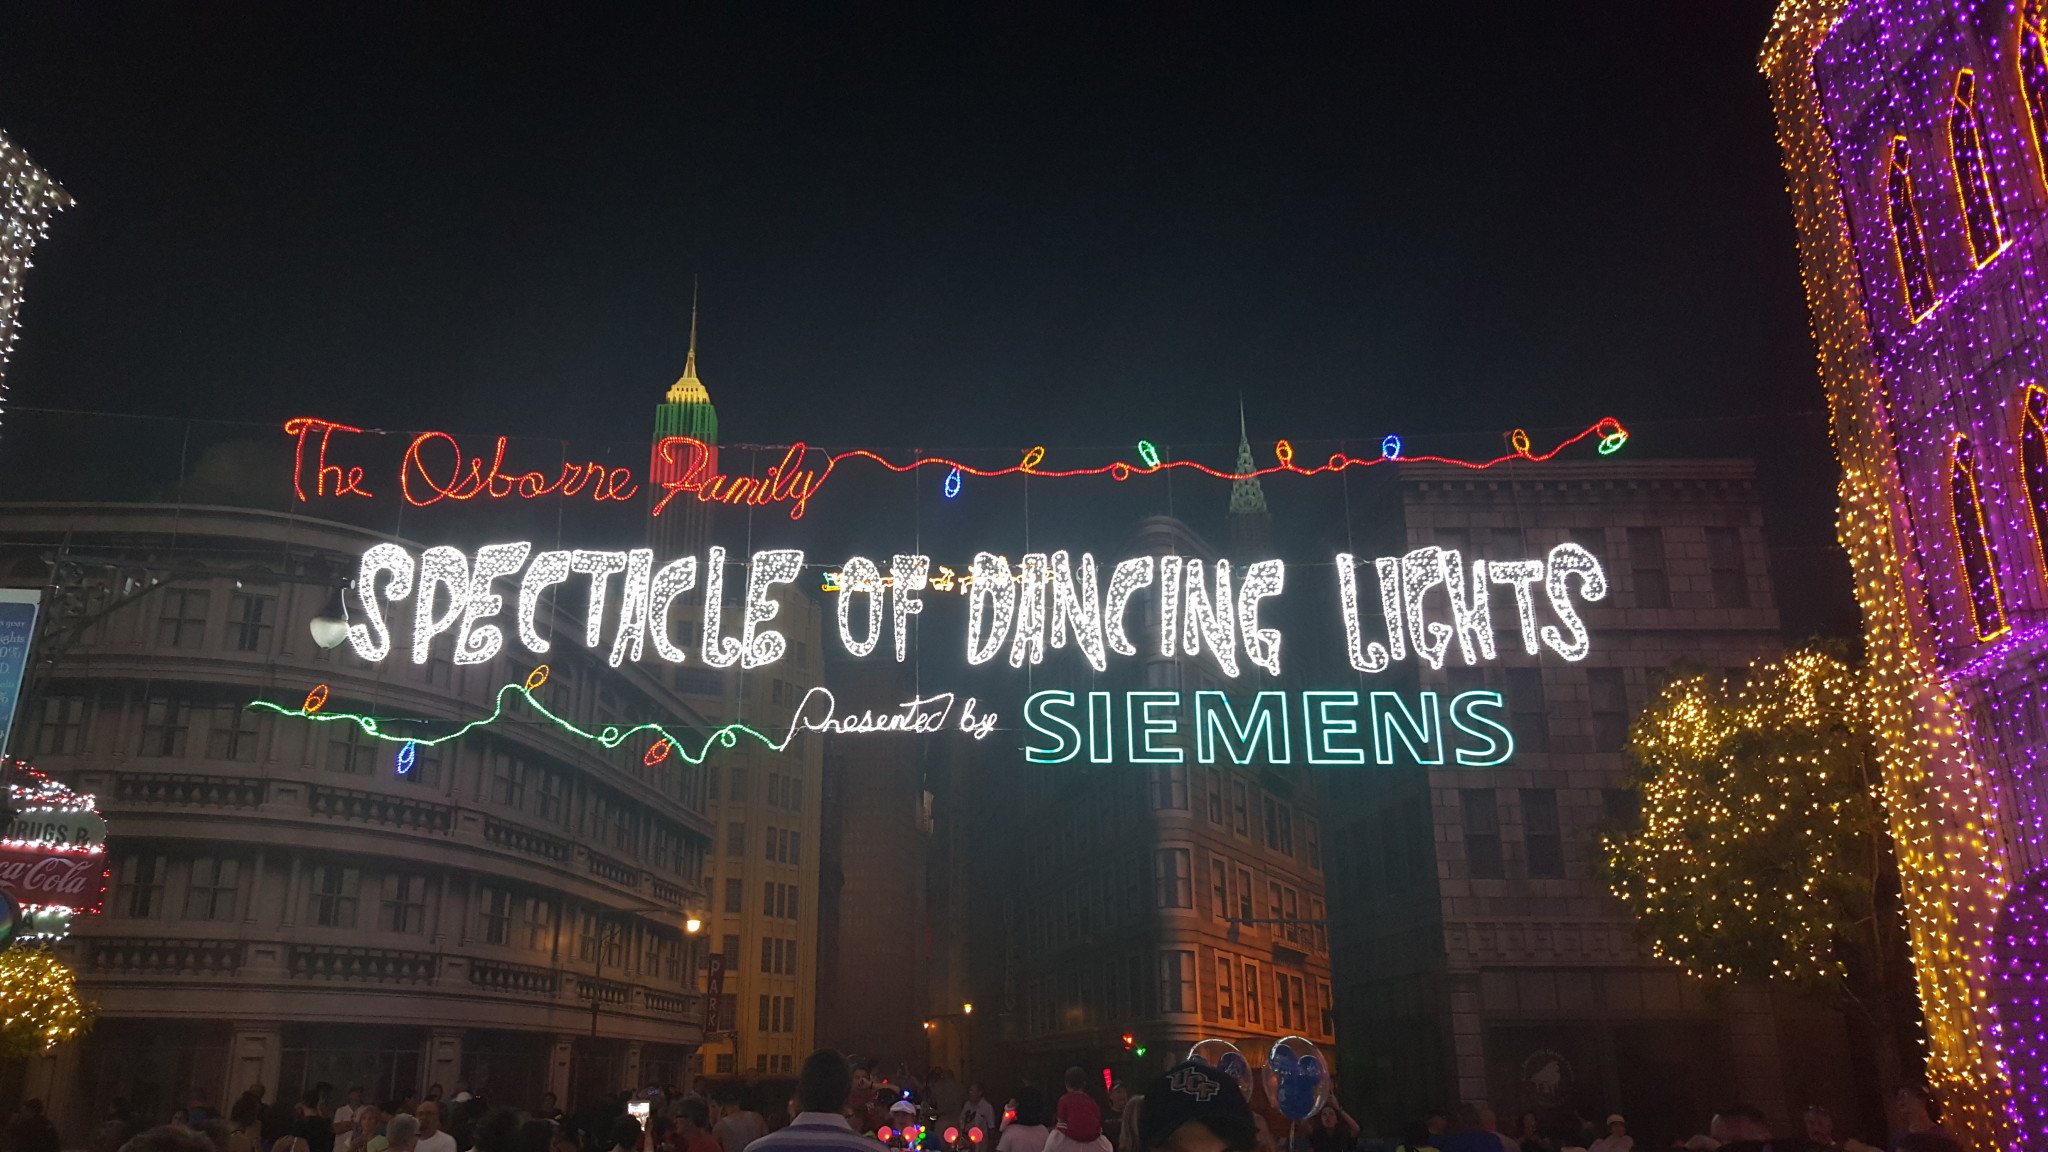 Special Live Stream of Osborne Family Spectacle of Dancing Lights this Wednesday!